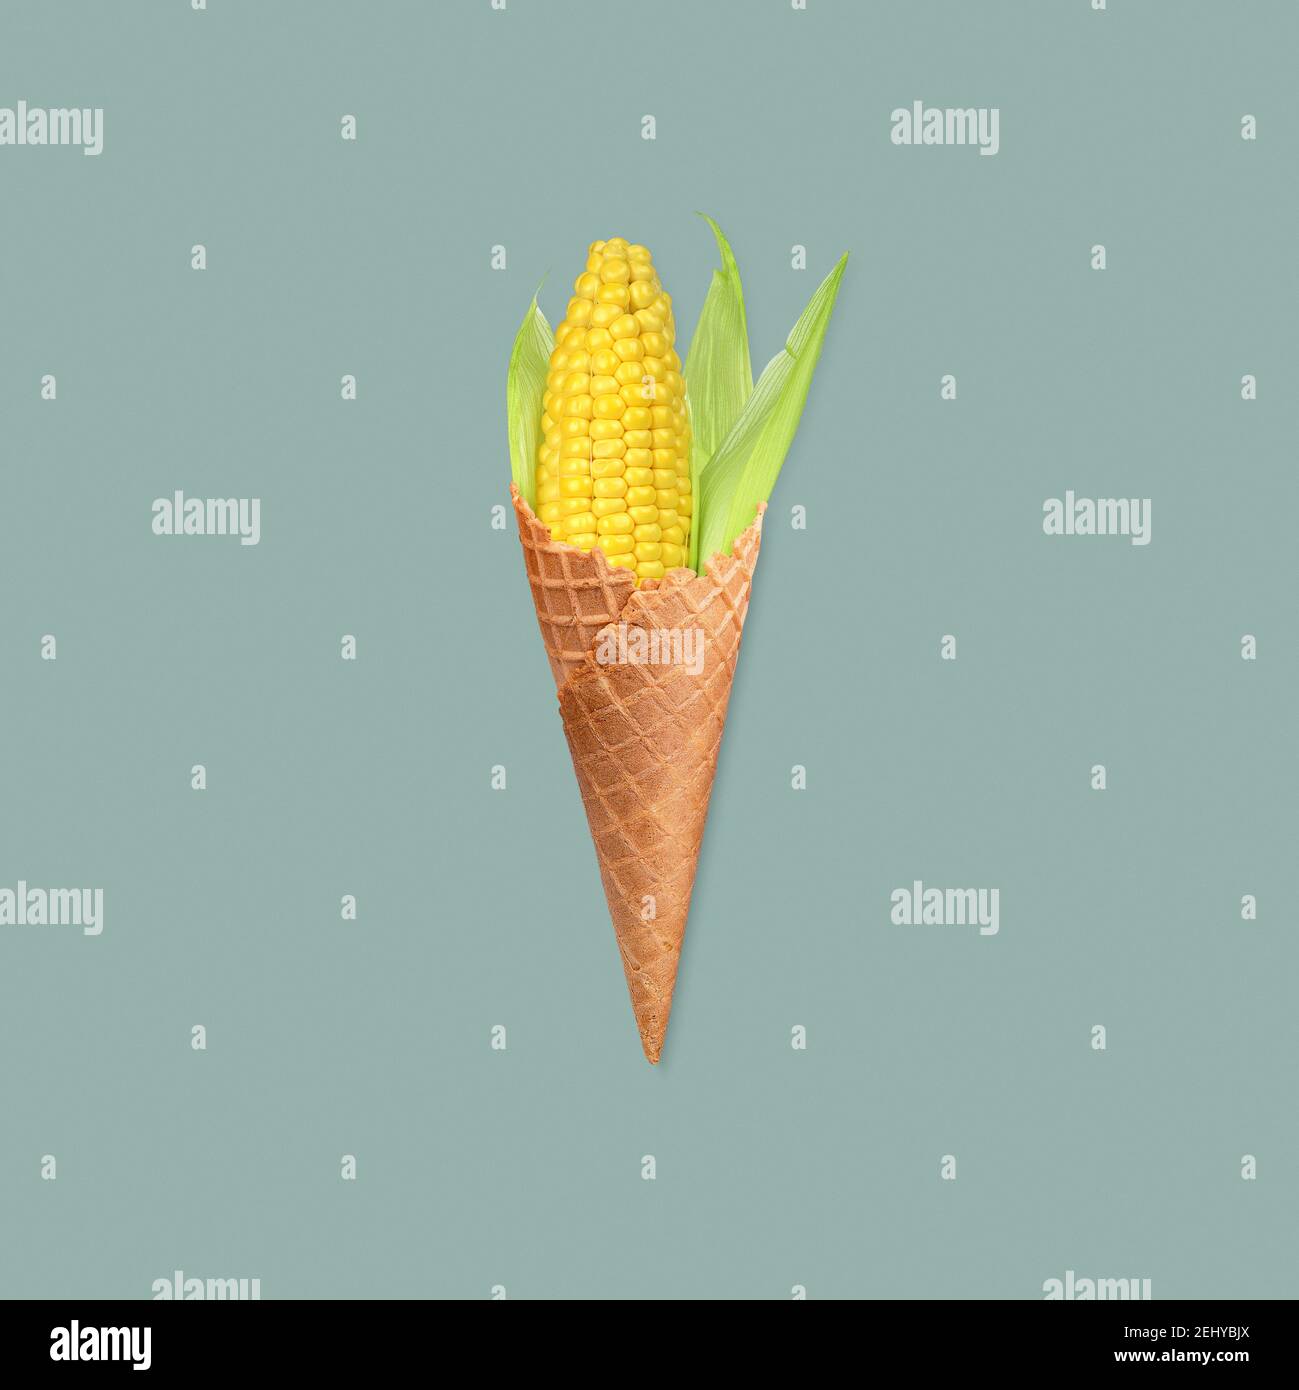 Funny healthy eating concept with corn ice cream photo manipulation on pastel background Stock Photo